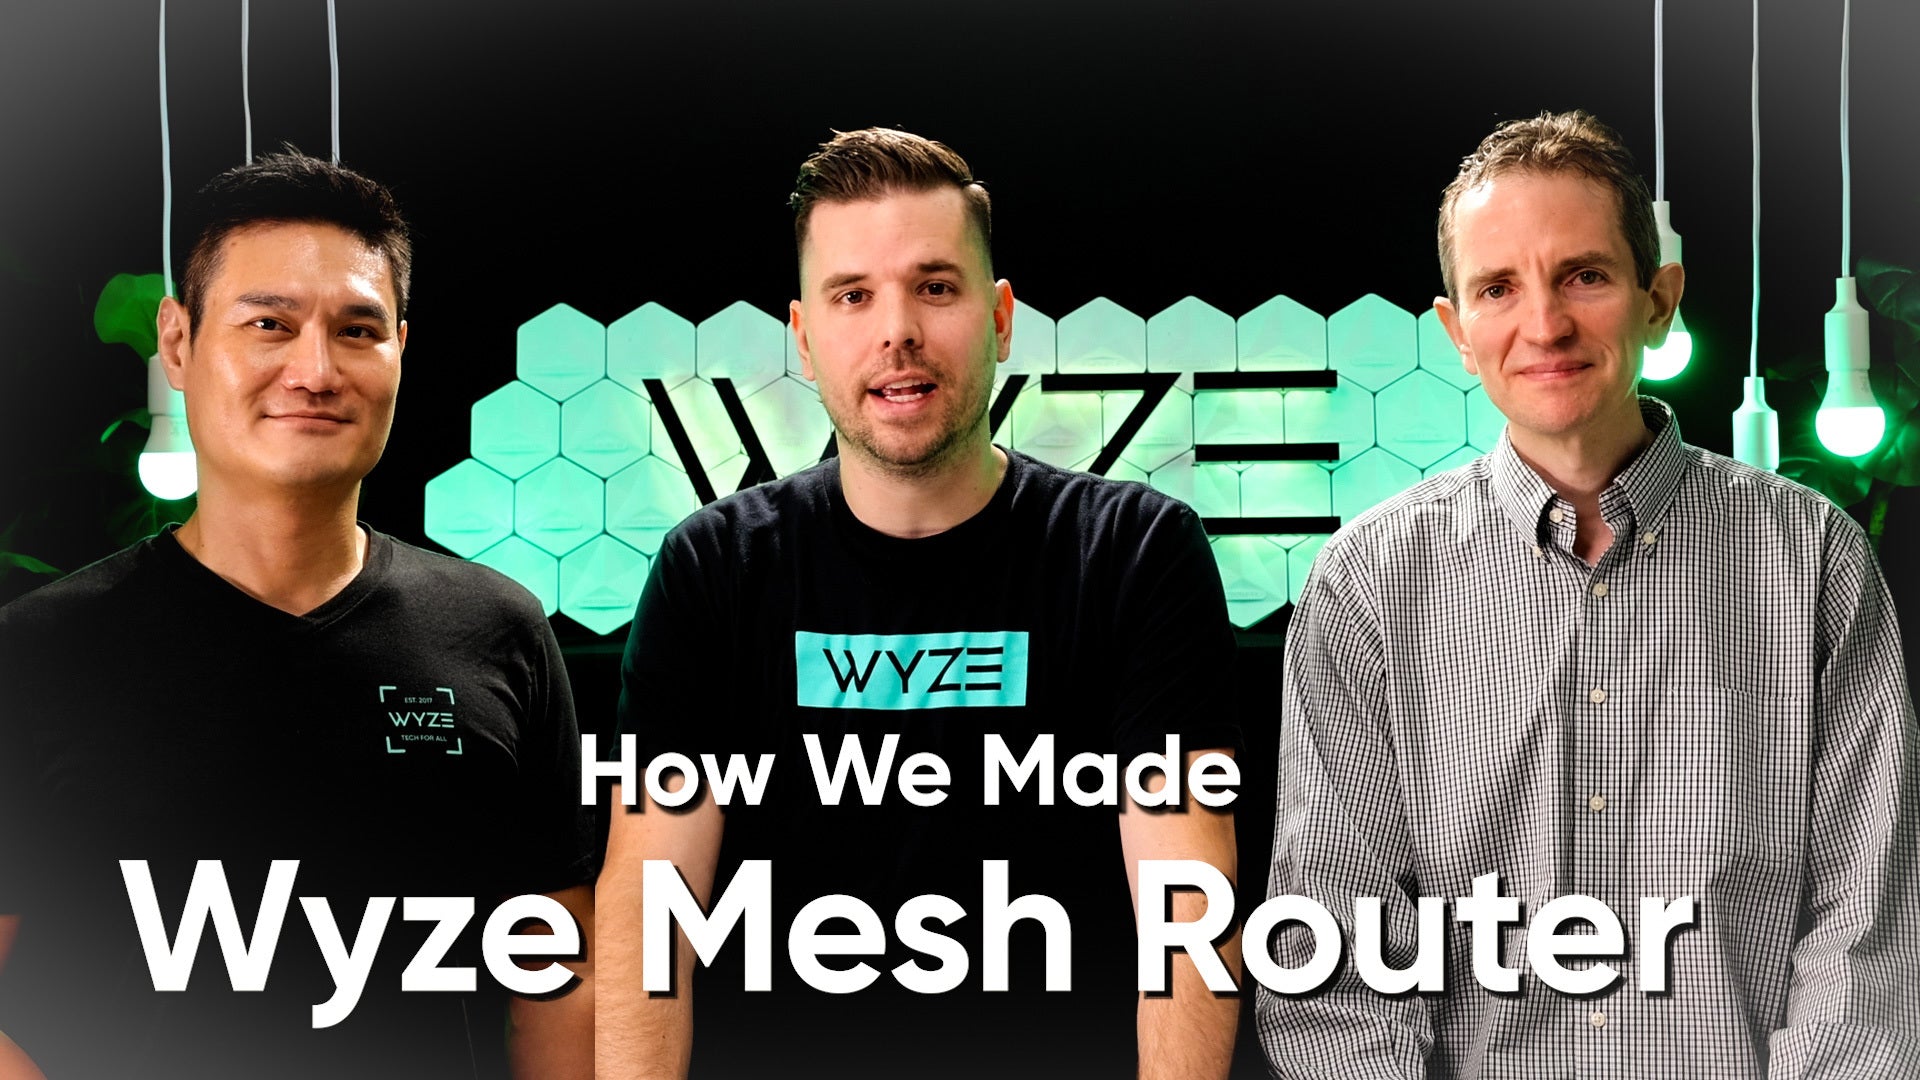 Load video: Intro video for how Wyze made their mesh routers